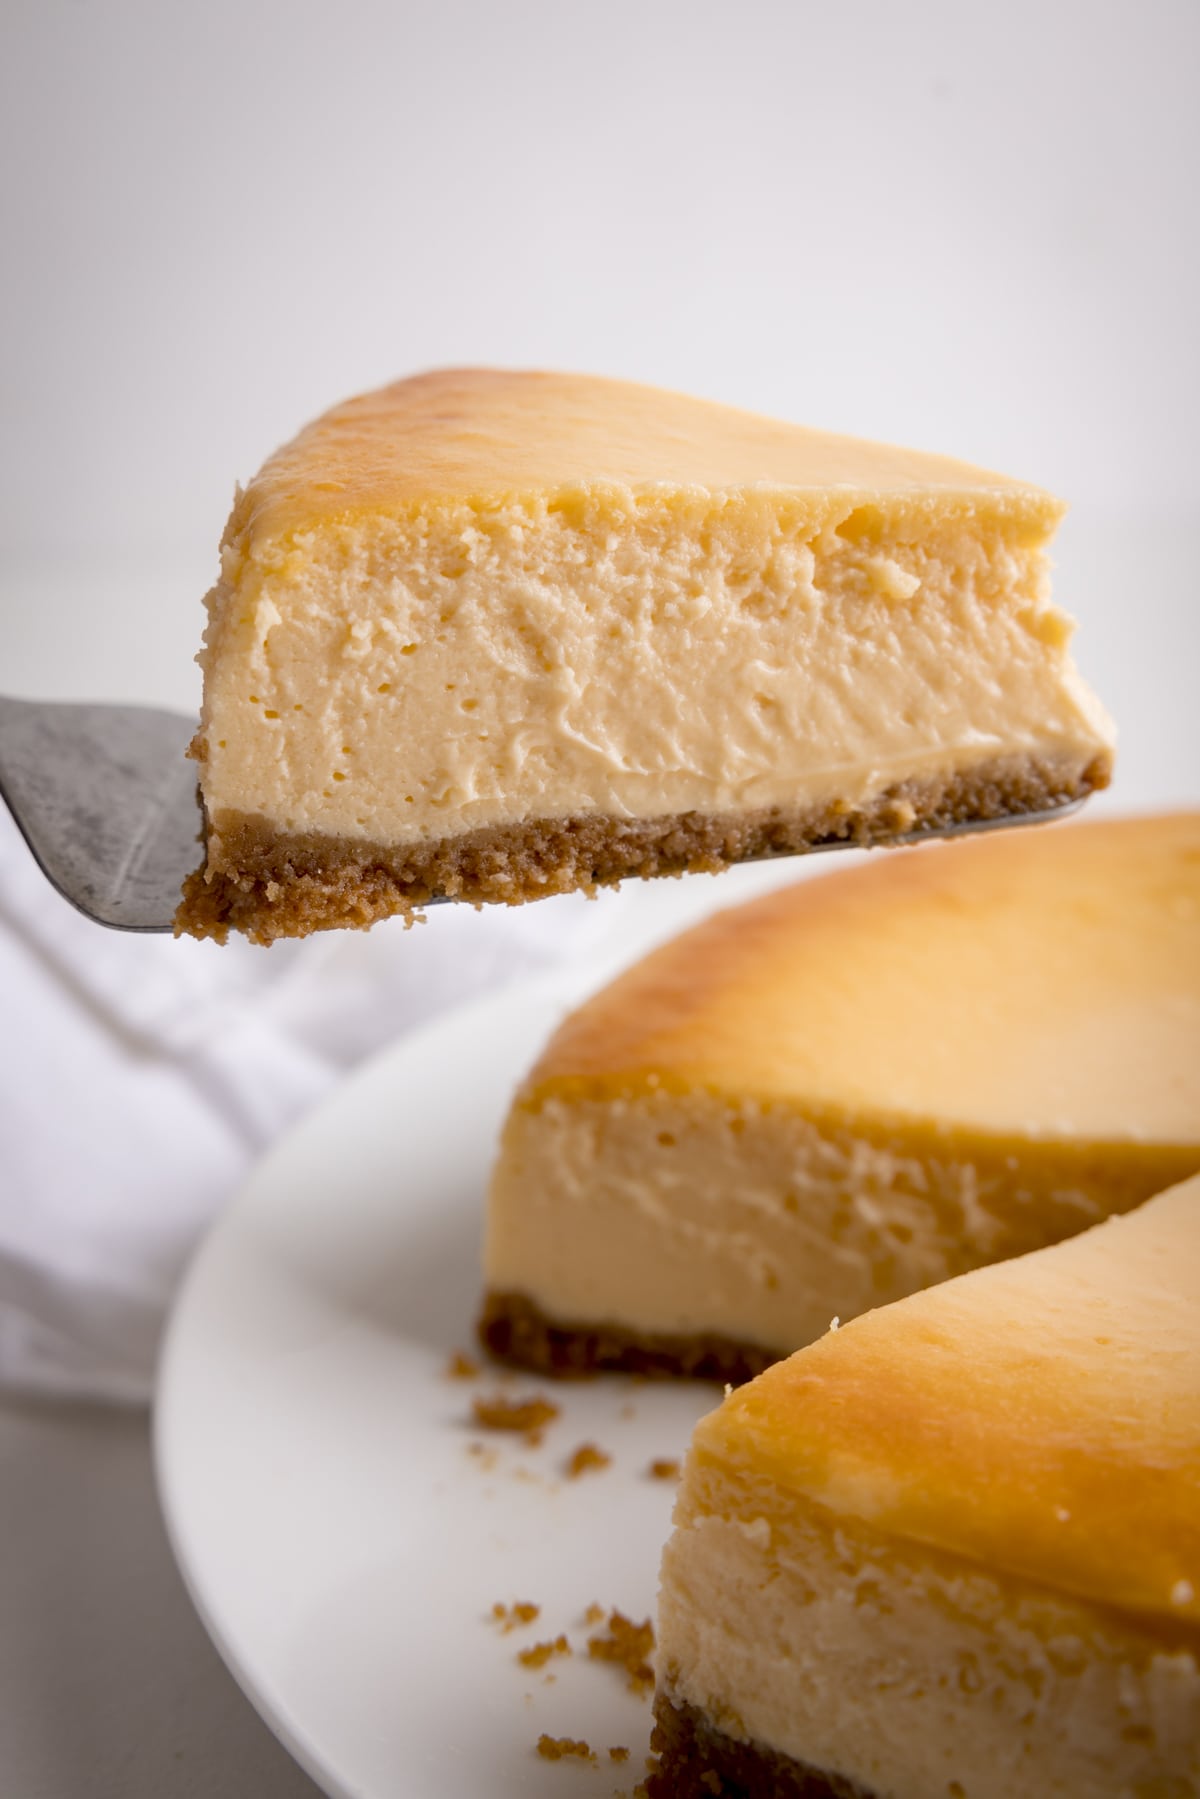 A closeup of a slice taken from a New York Cheesecake against a white background.